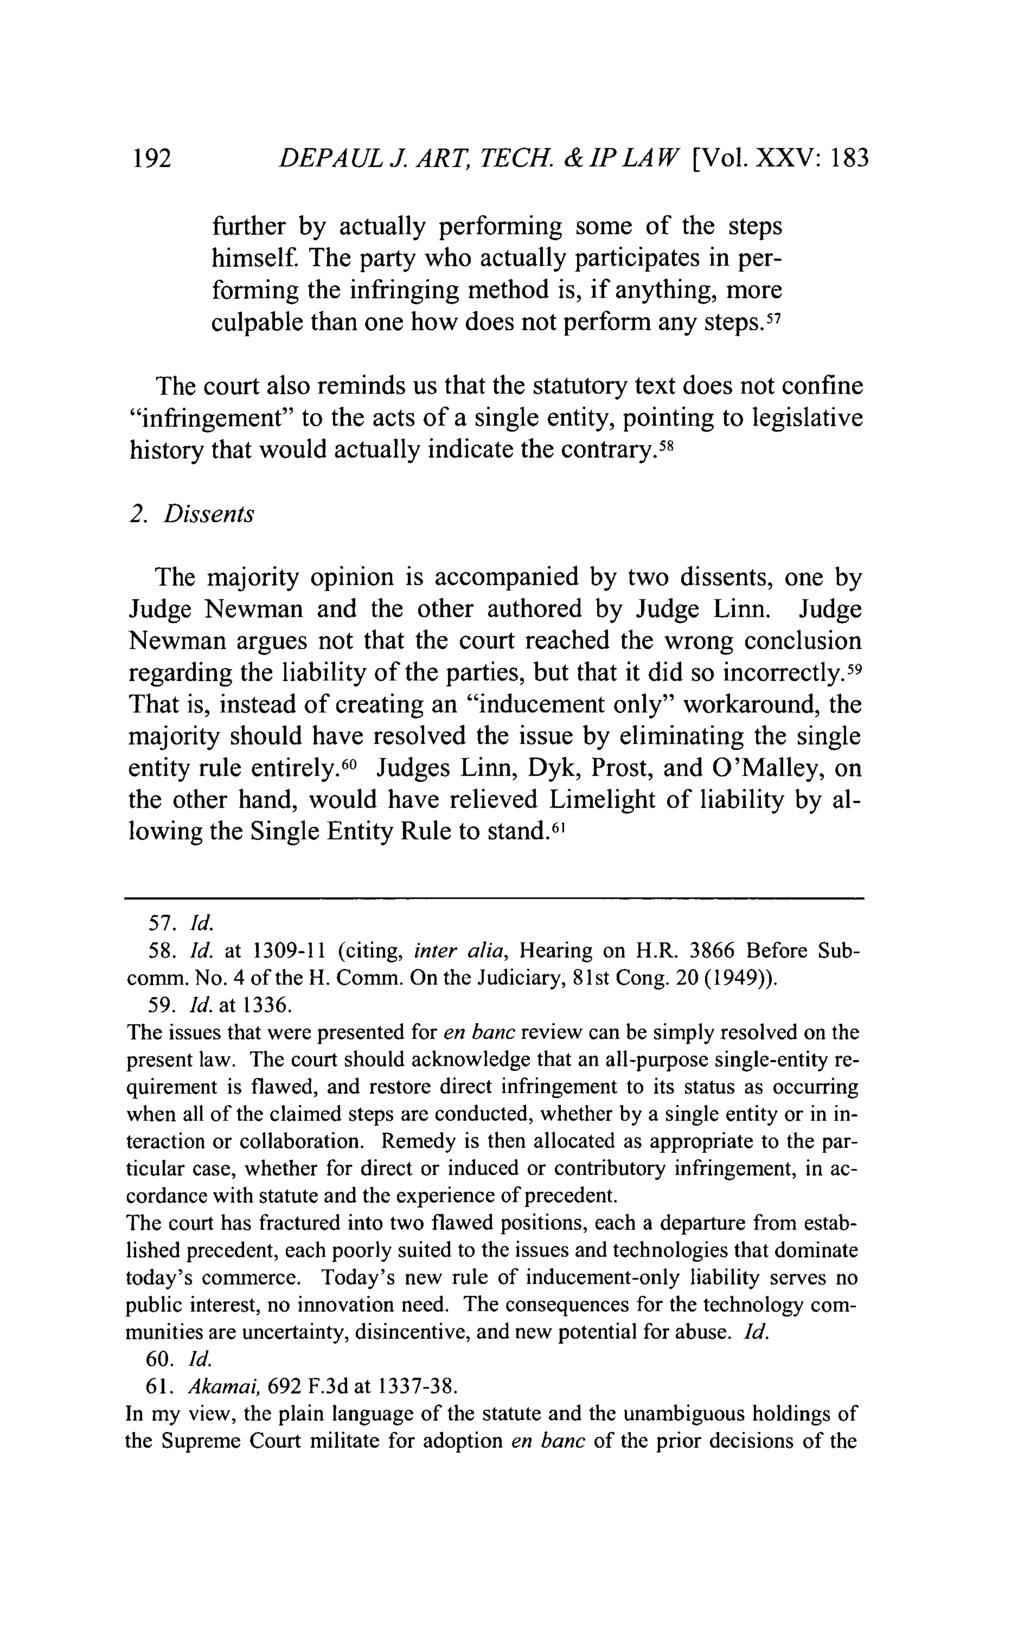 DePaul Journal of Art, Technology & Intellectual Property Law, Vol. 25, Iss. 1 [], Art. 6 192 DEPAUL J. ART, TECH. & IP LA W [Vol. XXV: 183 further by actually performing some of the steps himself.